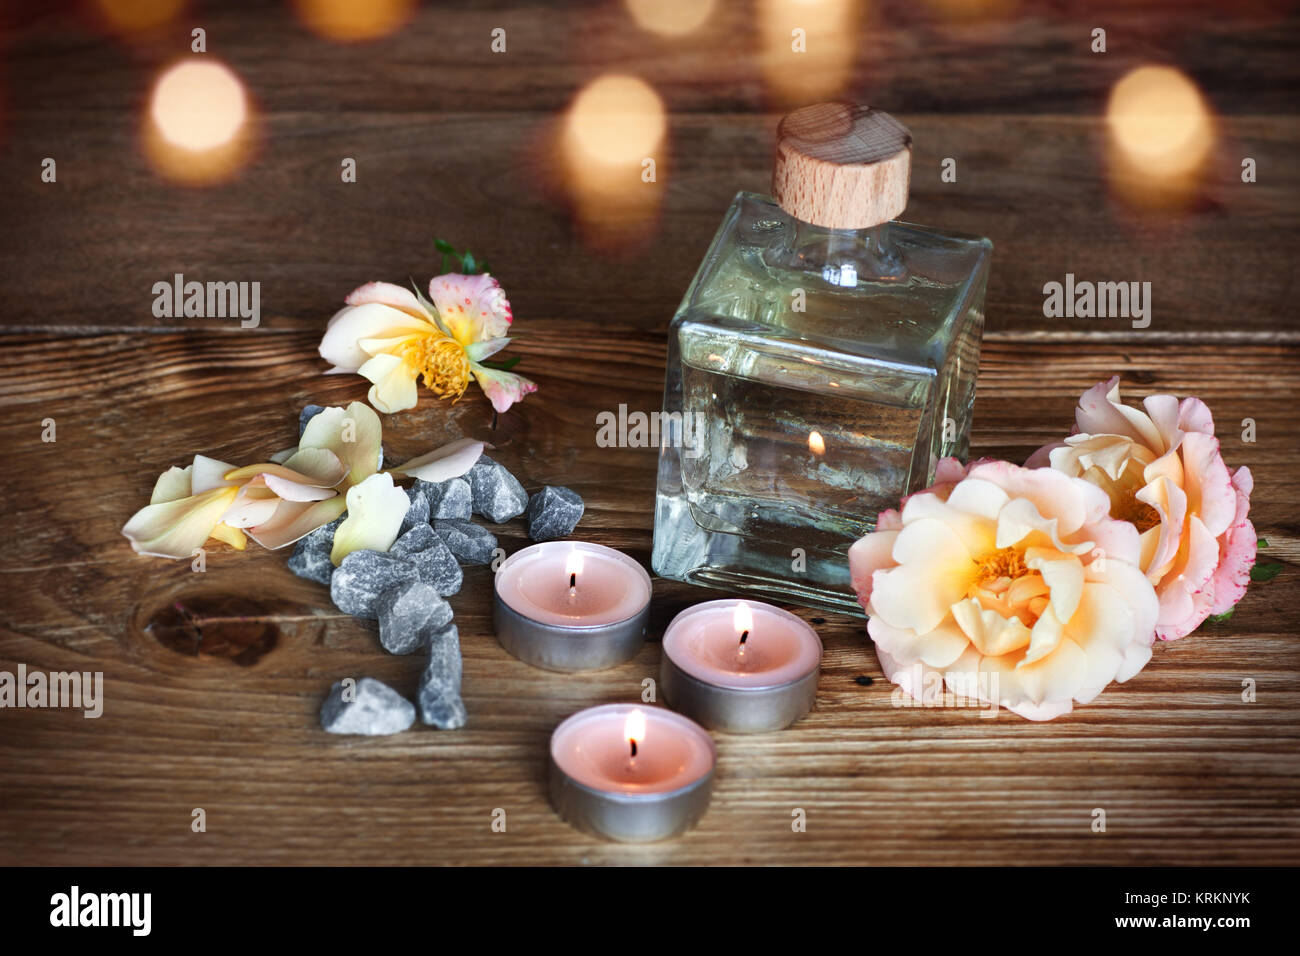 spa decoration for wellness Stock Photo